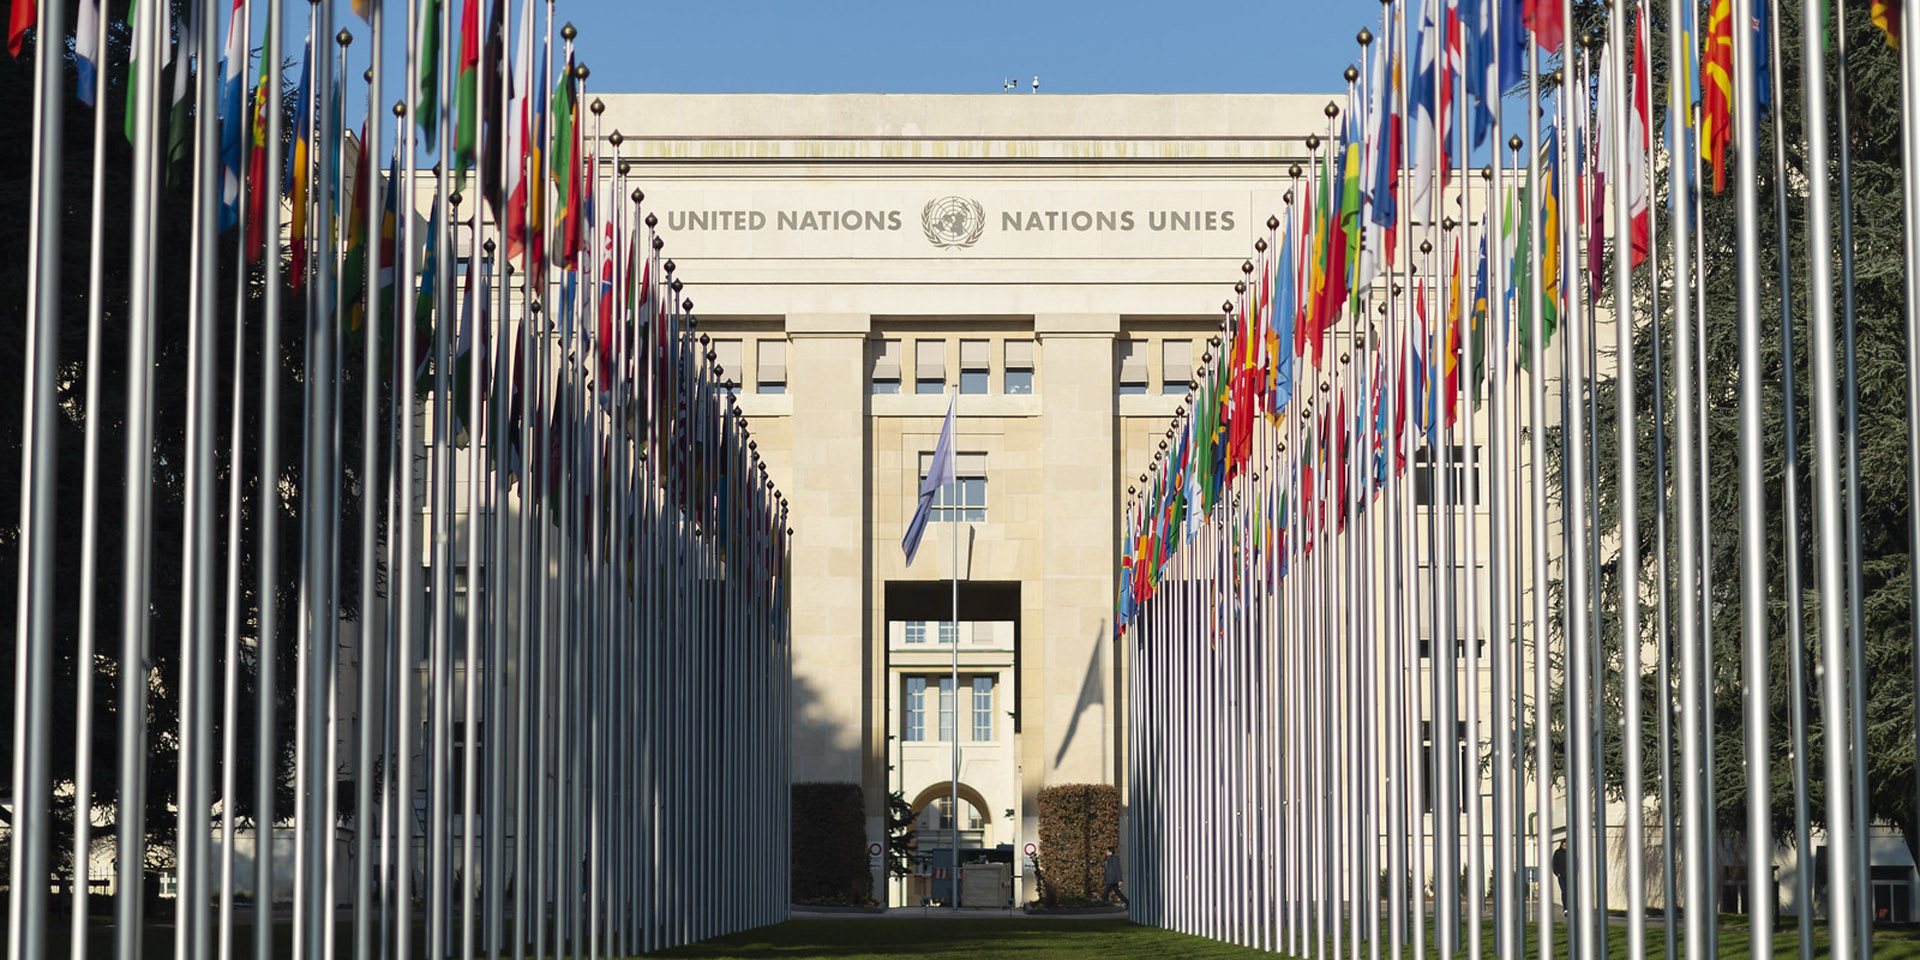 Member States' flags raised in front of the Palais des Nations in Geneva.